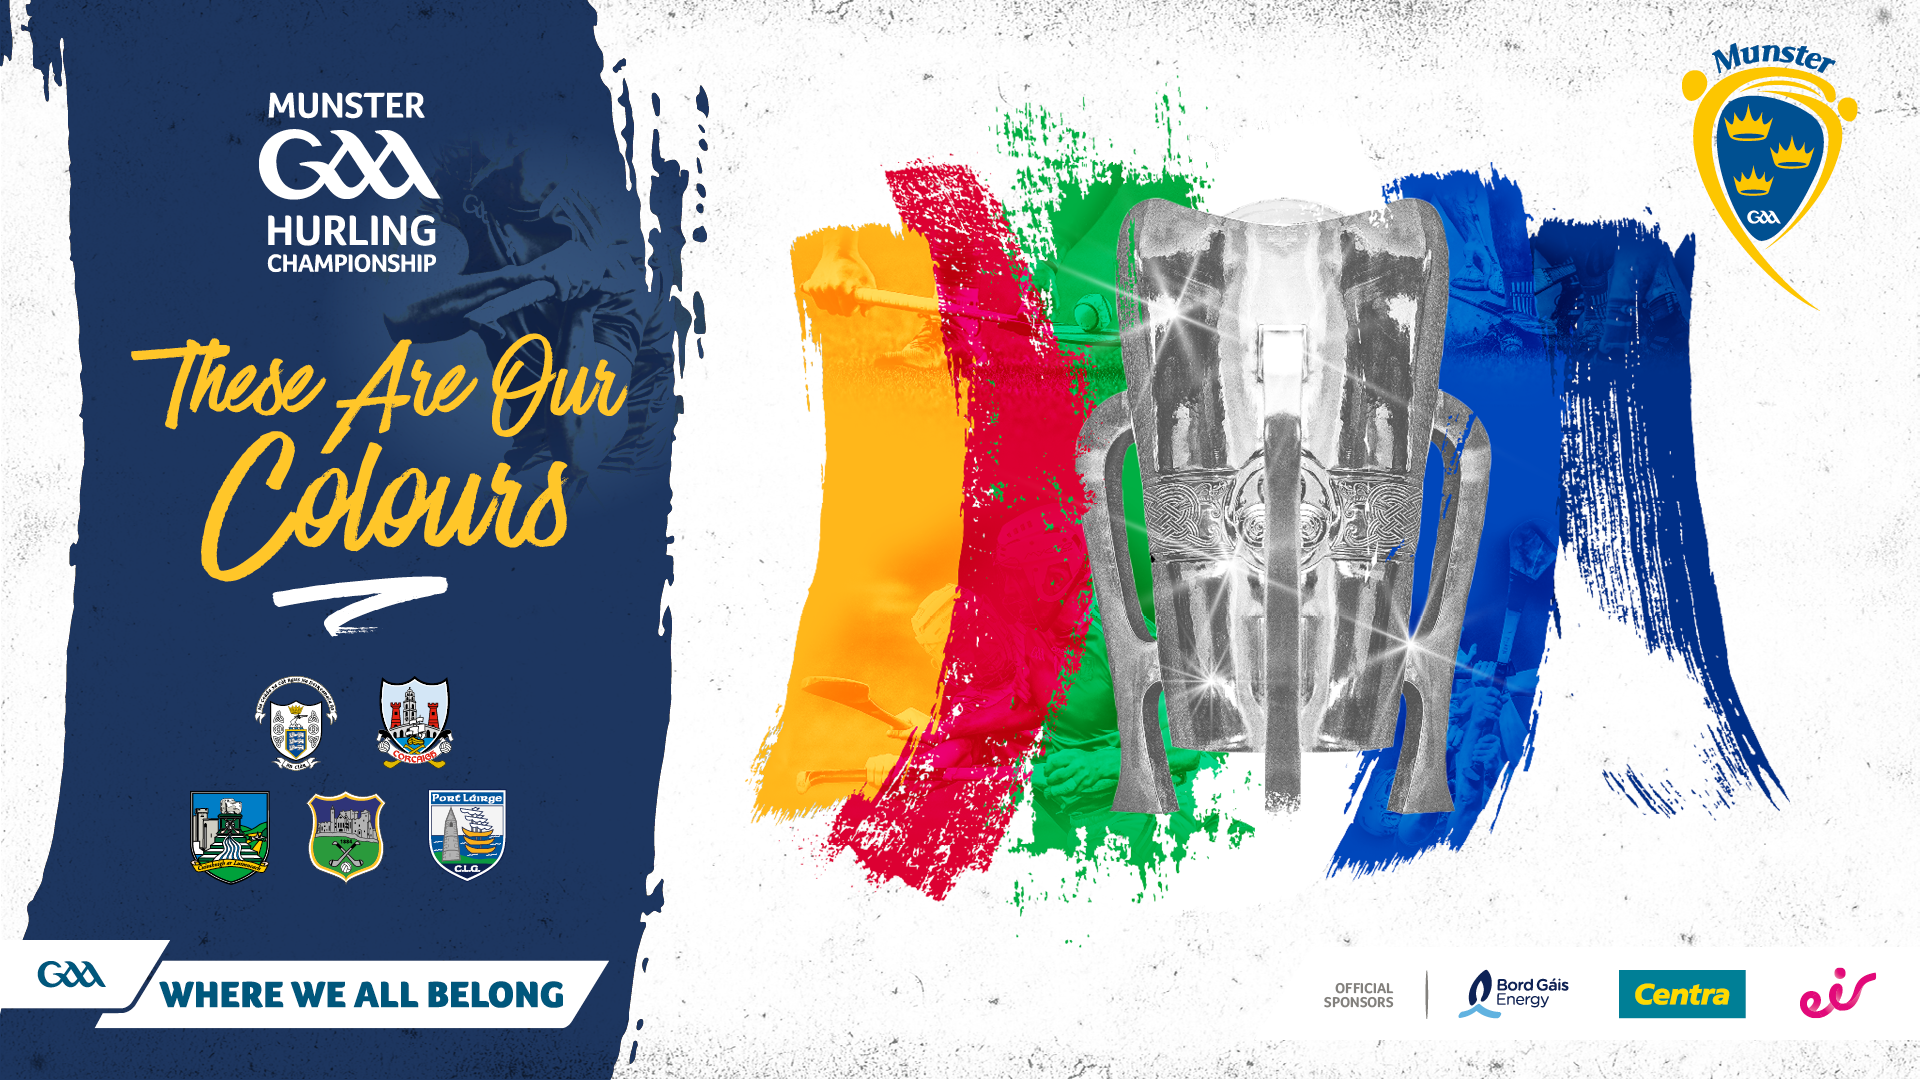 Munster GAA Senior Hurling and Football Championship Tickets now on sale